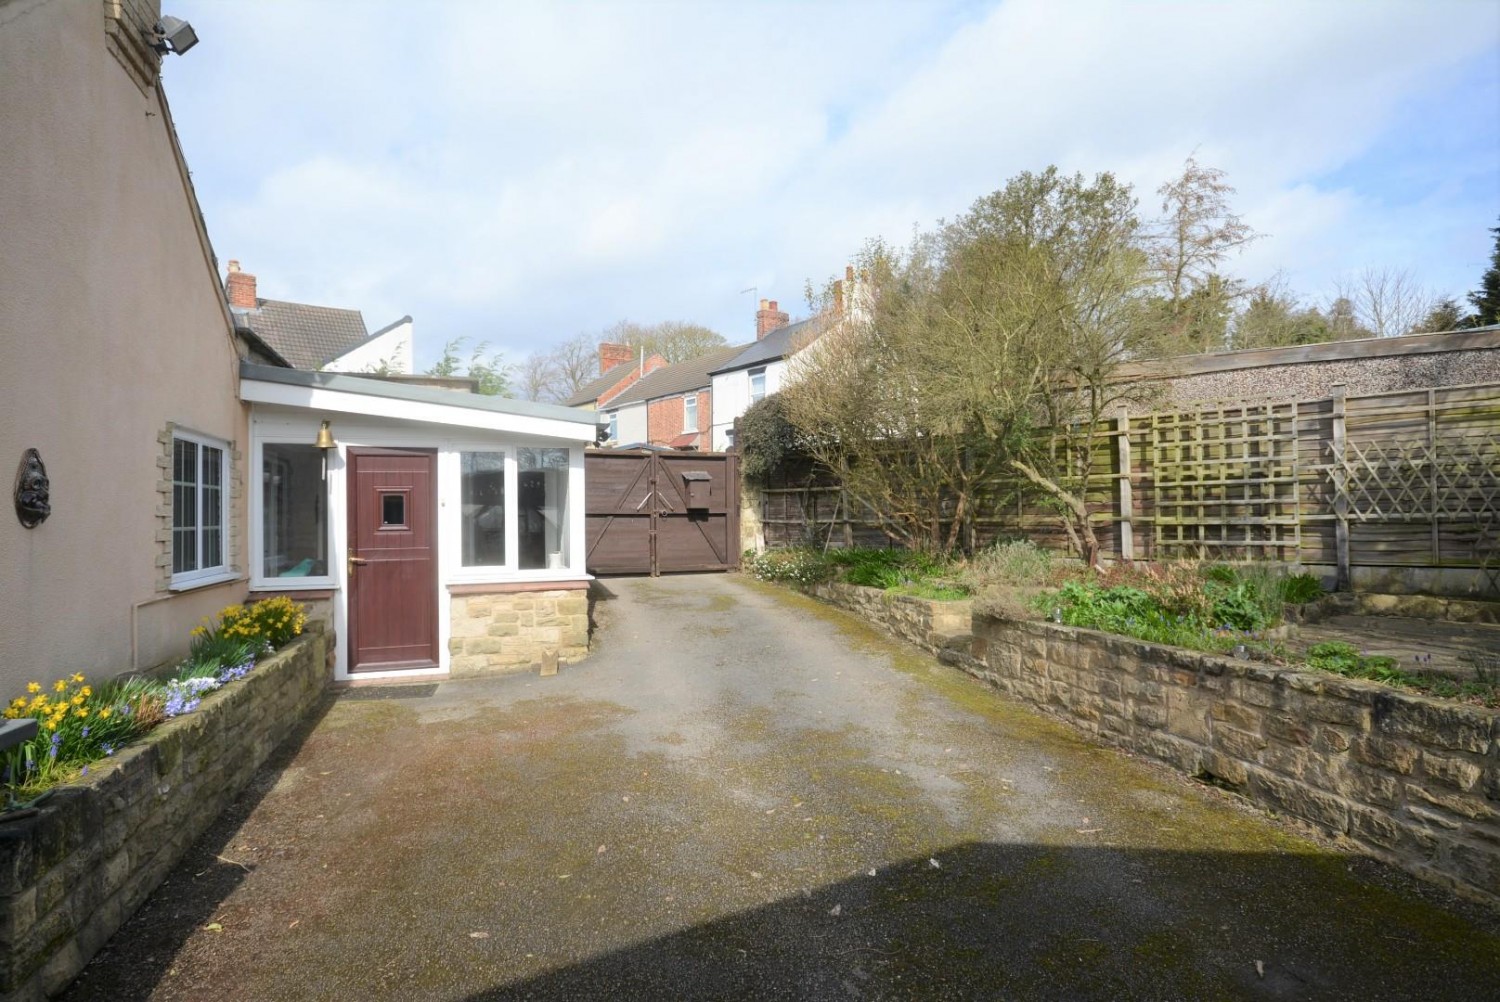 Chesterfield Road, Shuttlewood, Chesterfield, S44 6QL